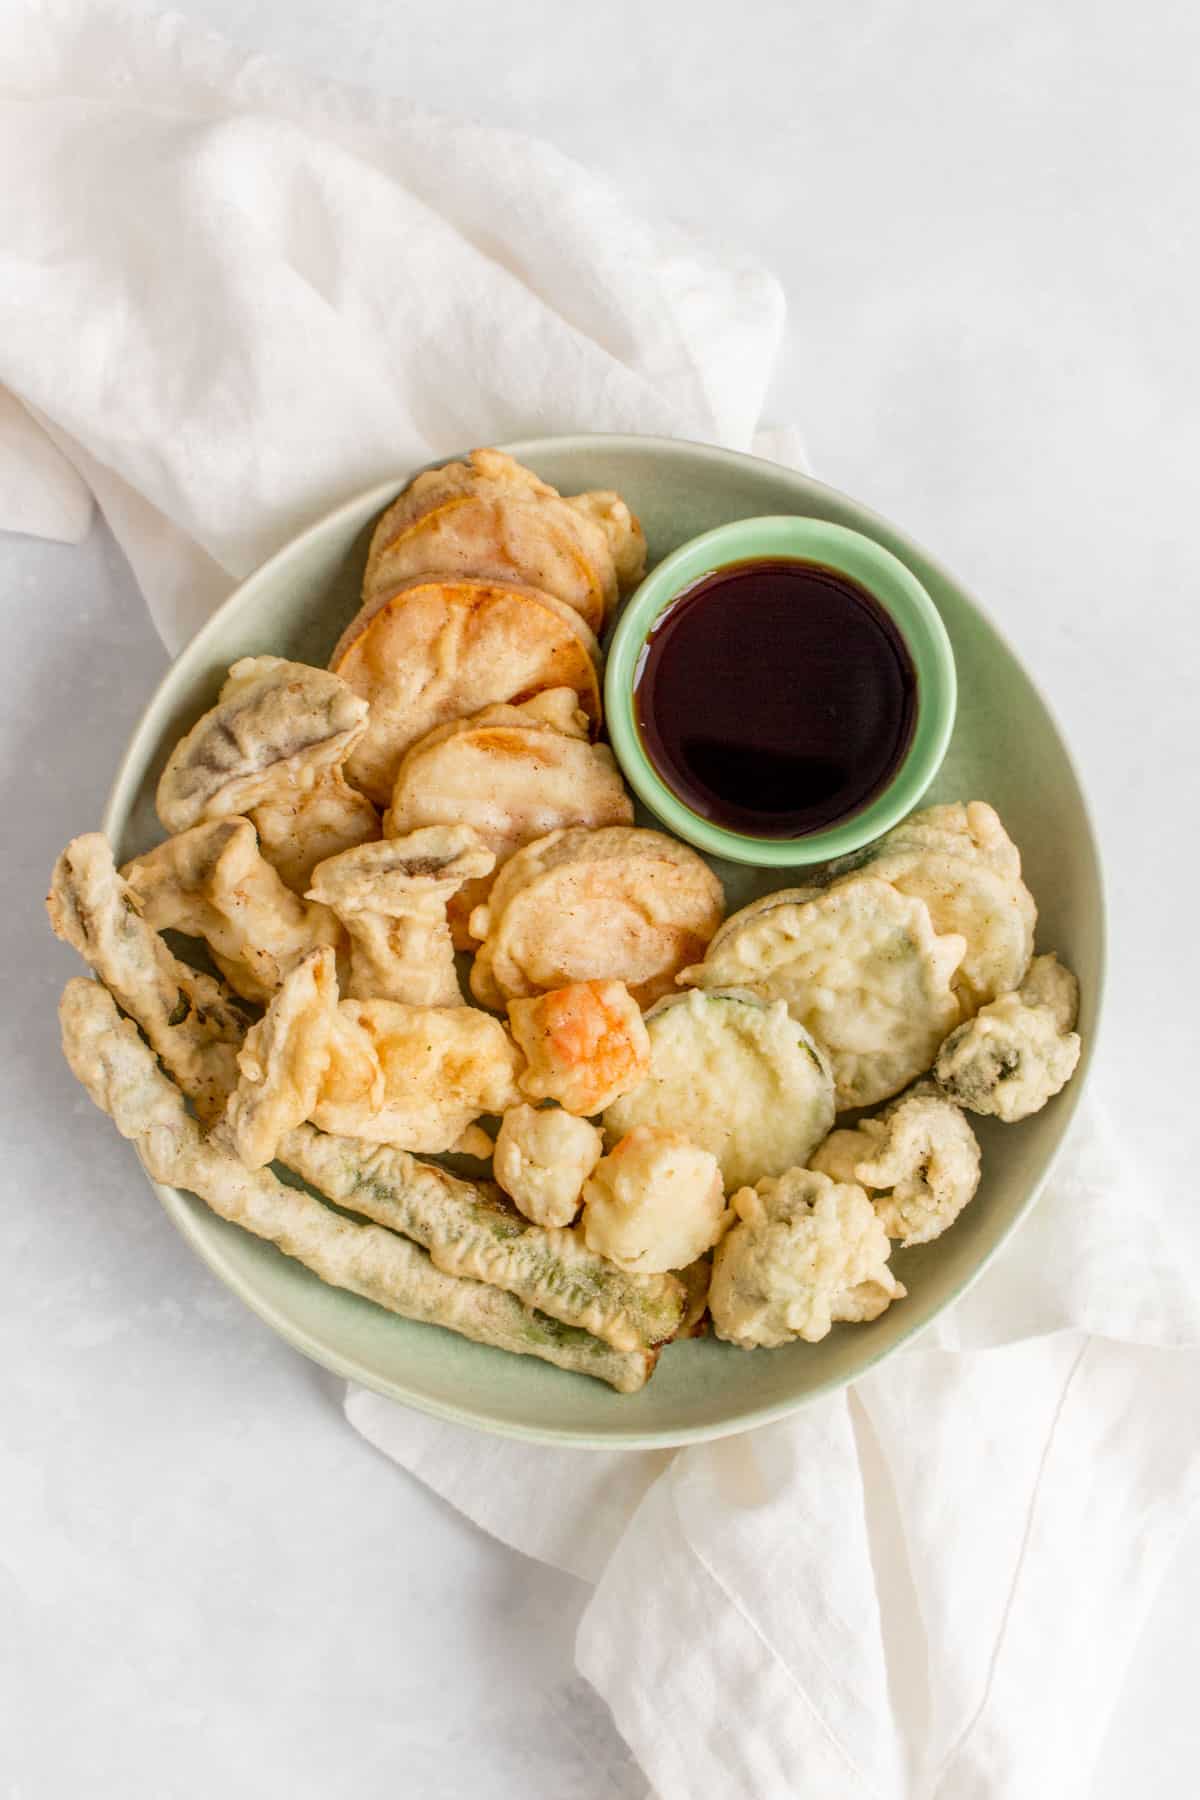 Plate of mixed vegetable tempura with dipping sauce.